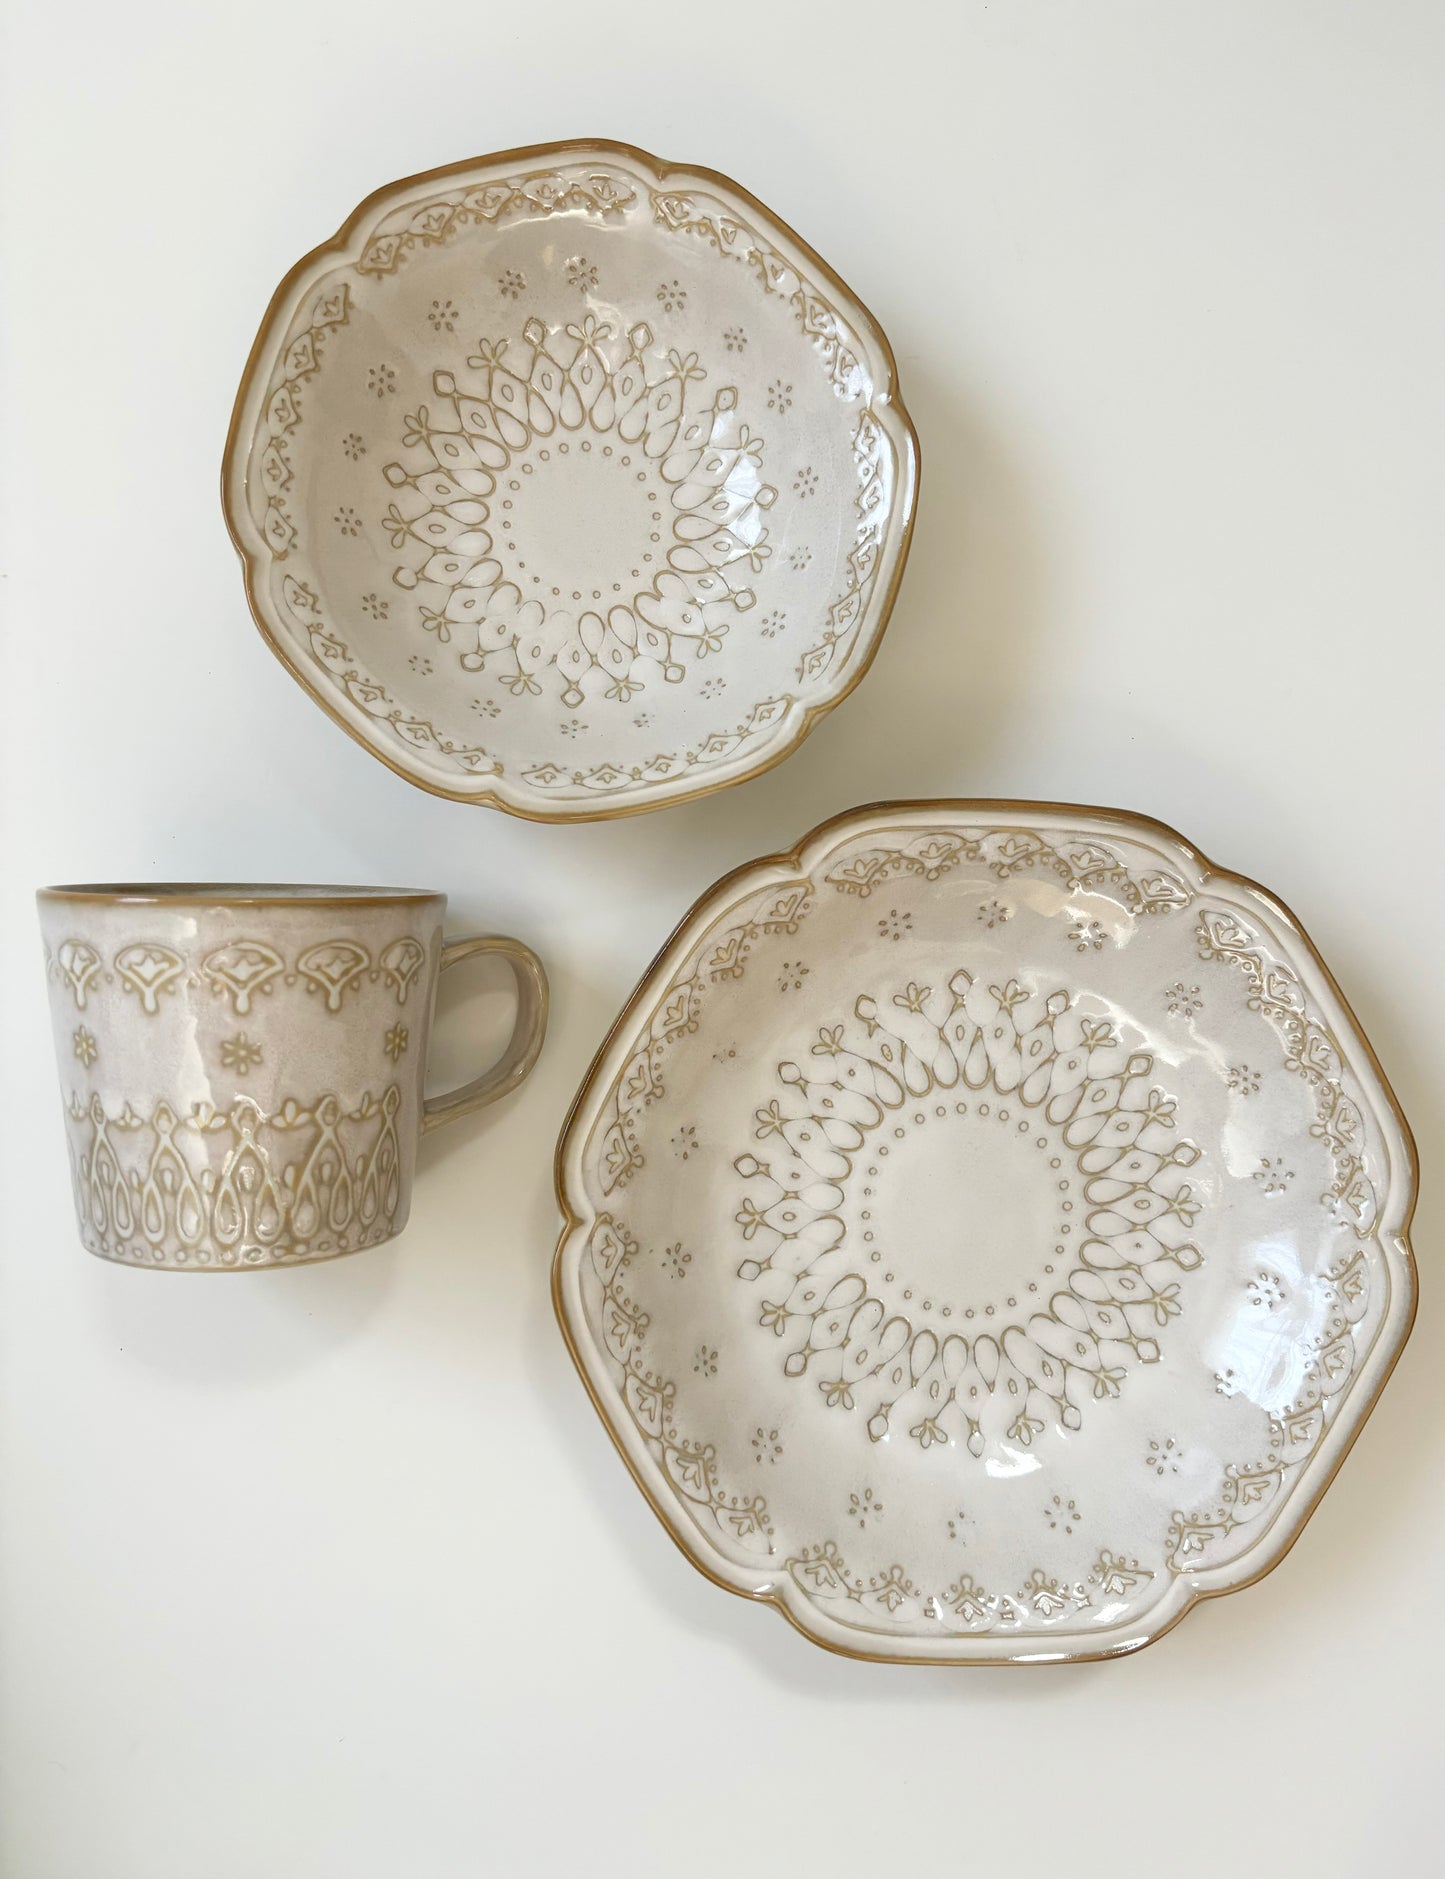 adel lace plate